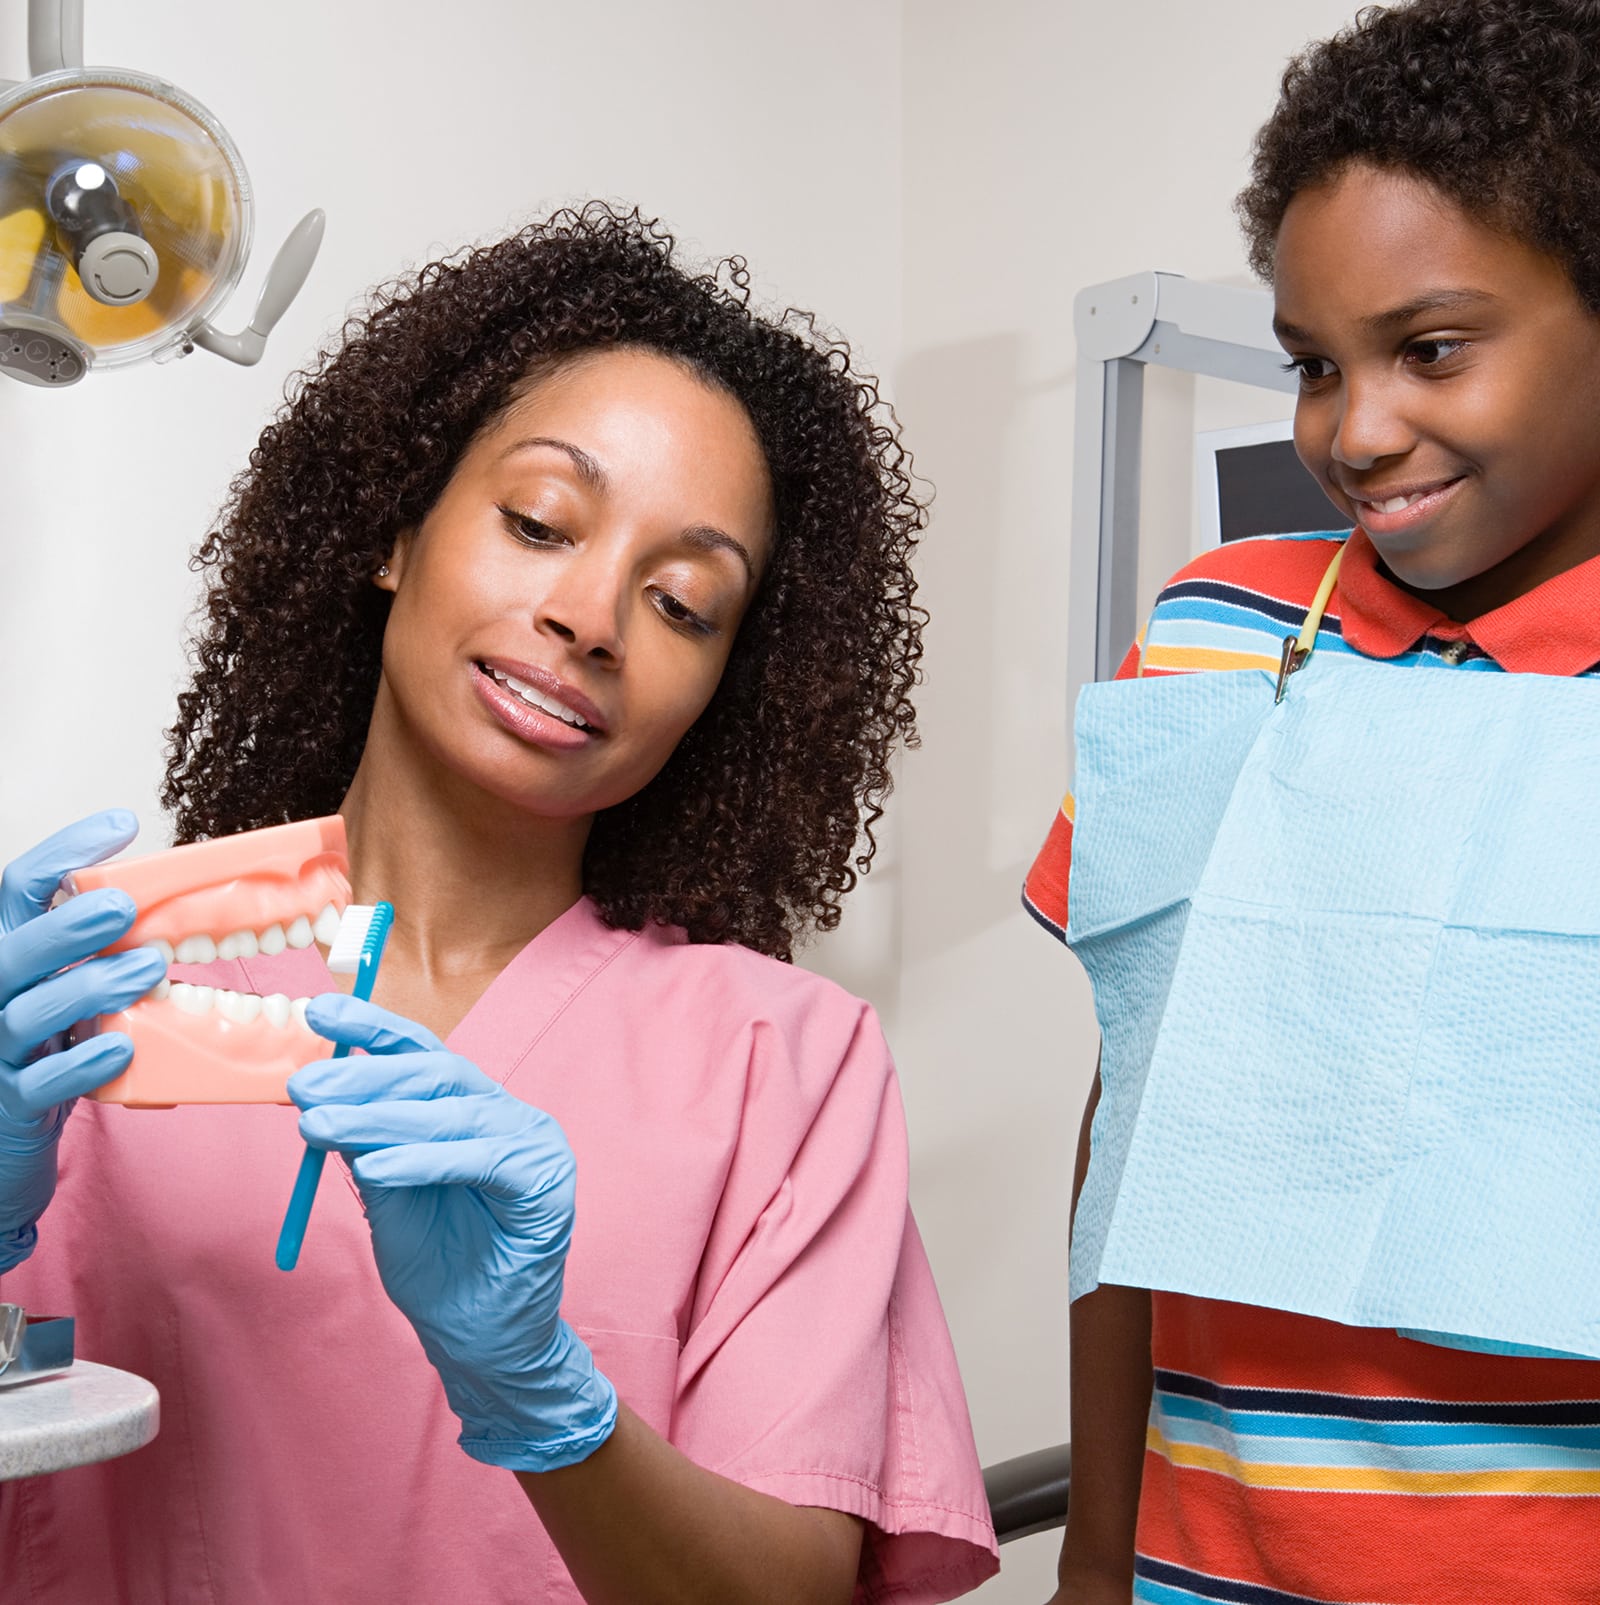 Featured image for “April 7-14 is National Dental Hygienist Week”